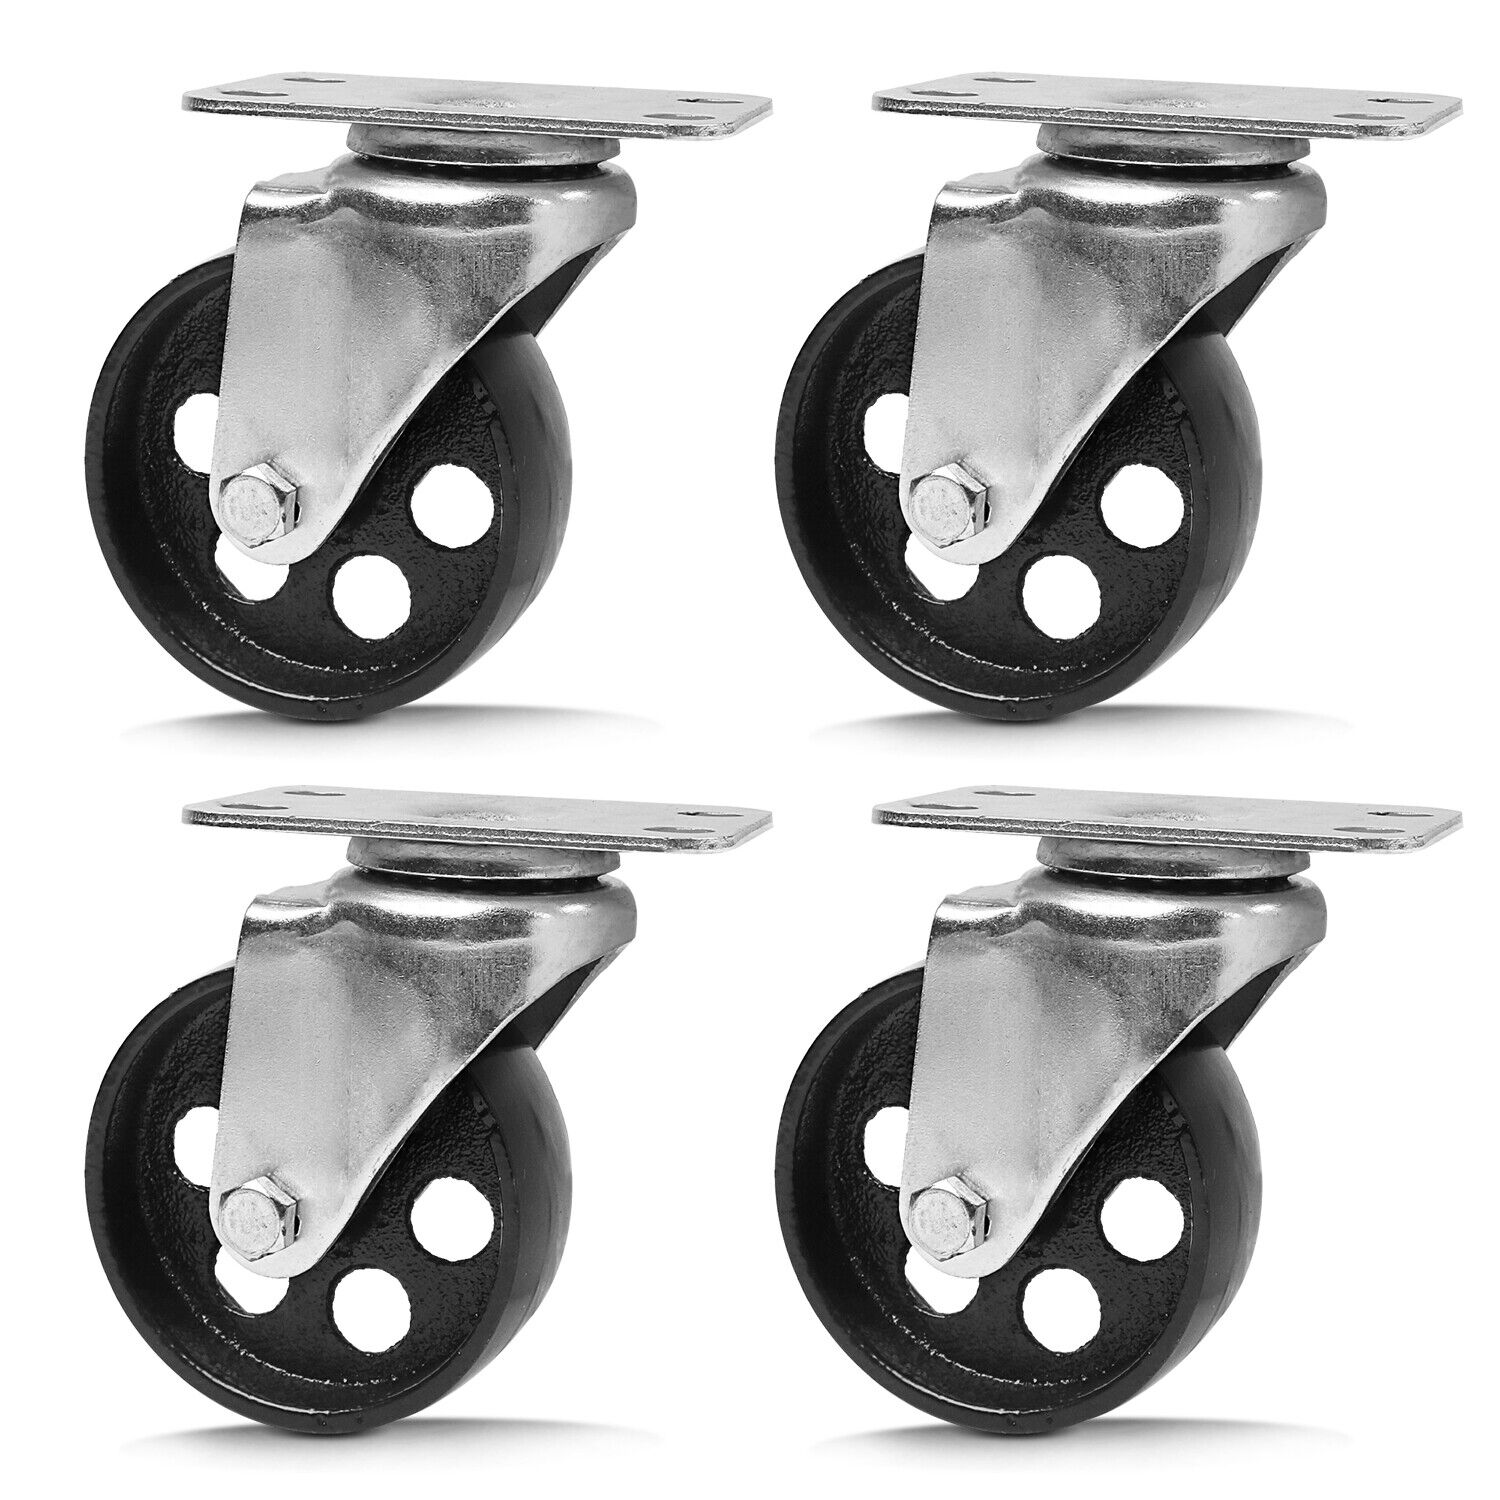 Set of four 3.5-inch Heavy Duty Steel Castor Wheels, featuring industrial-grade bearings, swivel casters with a 500KG per wheel loading capacity, and a robust steel construction for long-lasting use